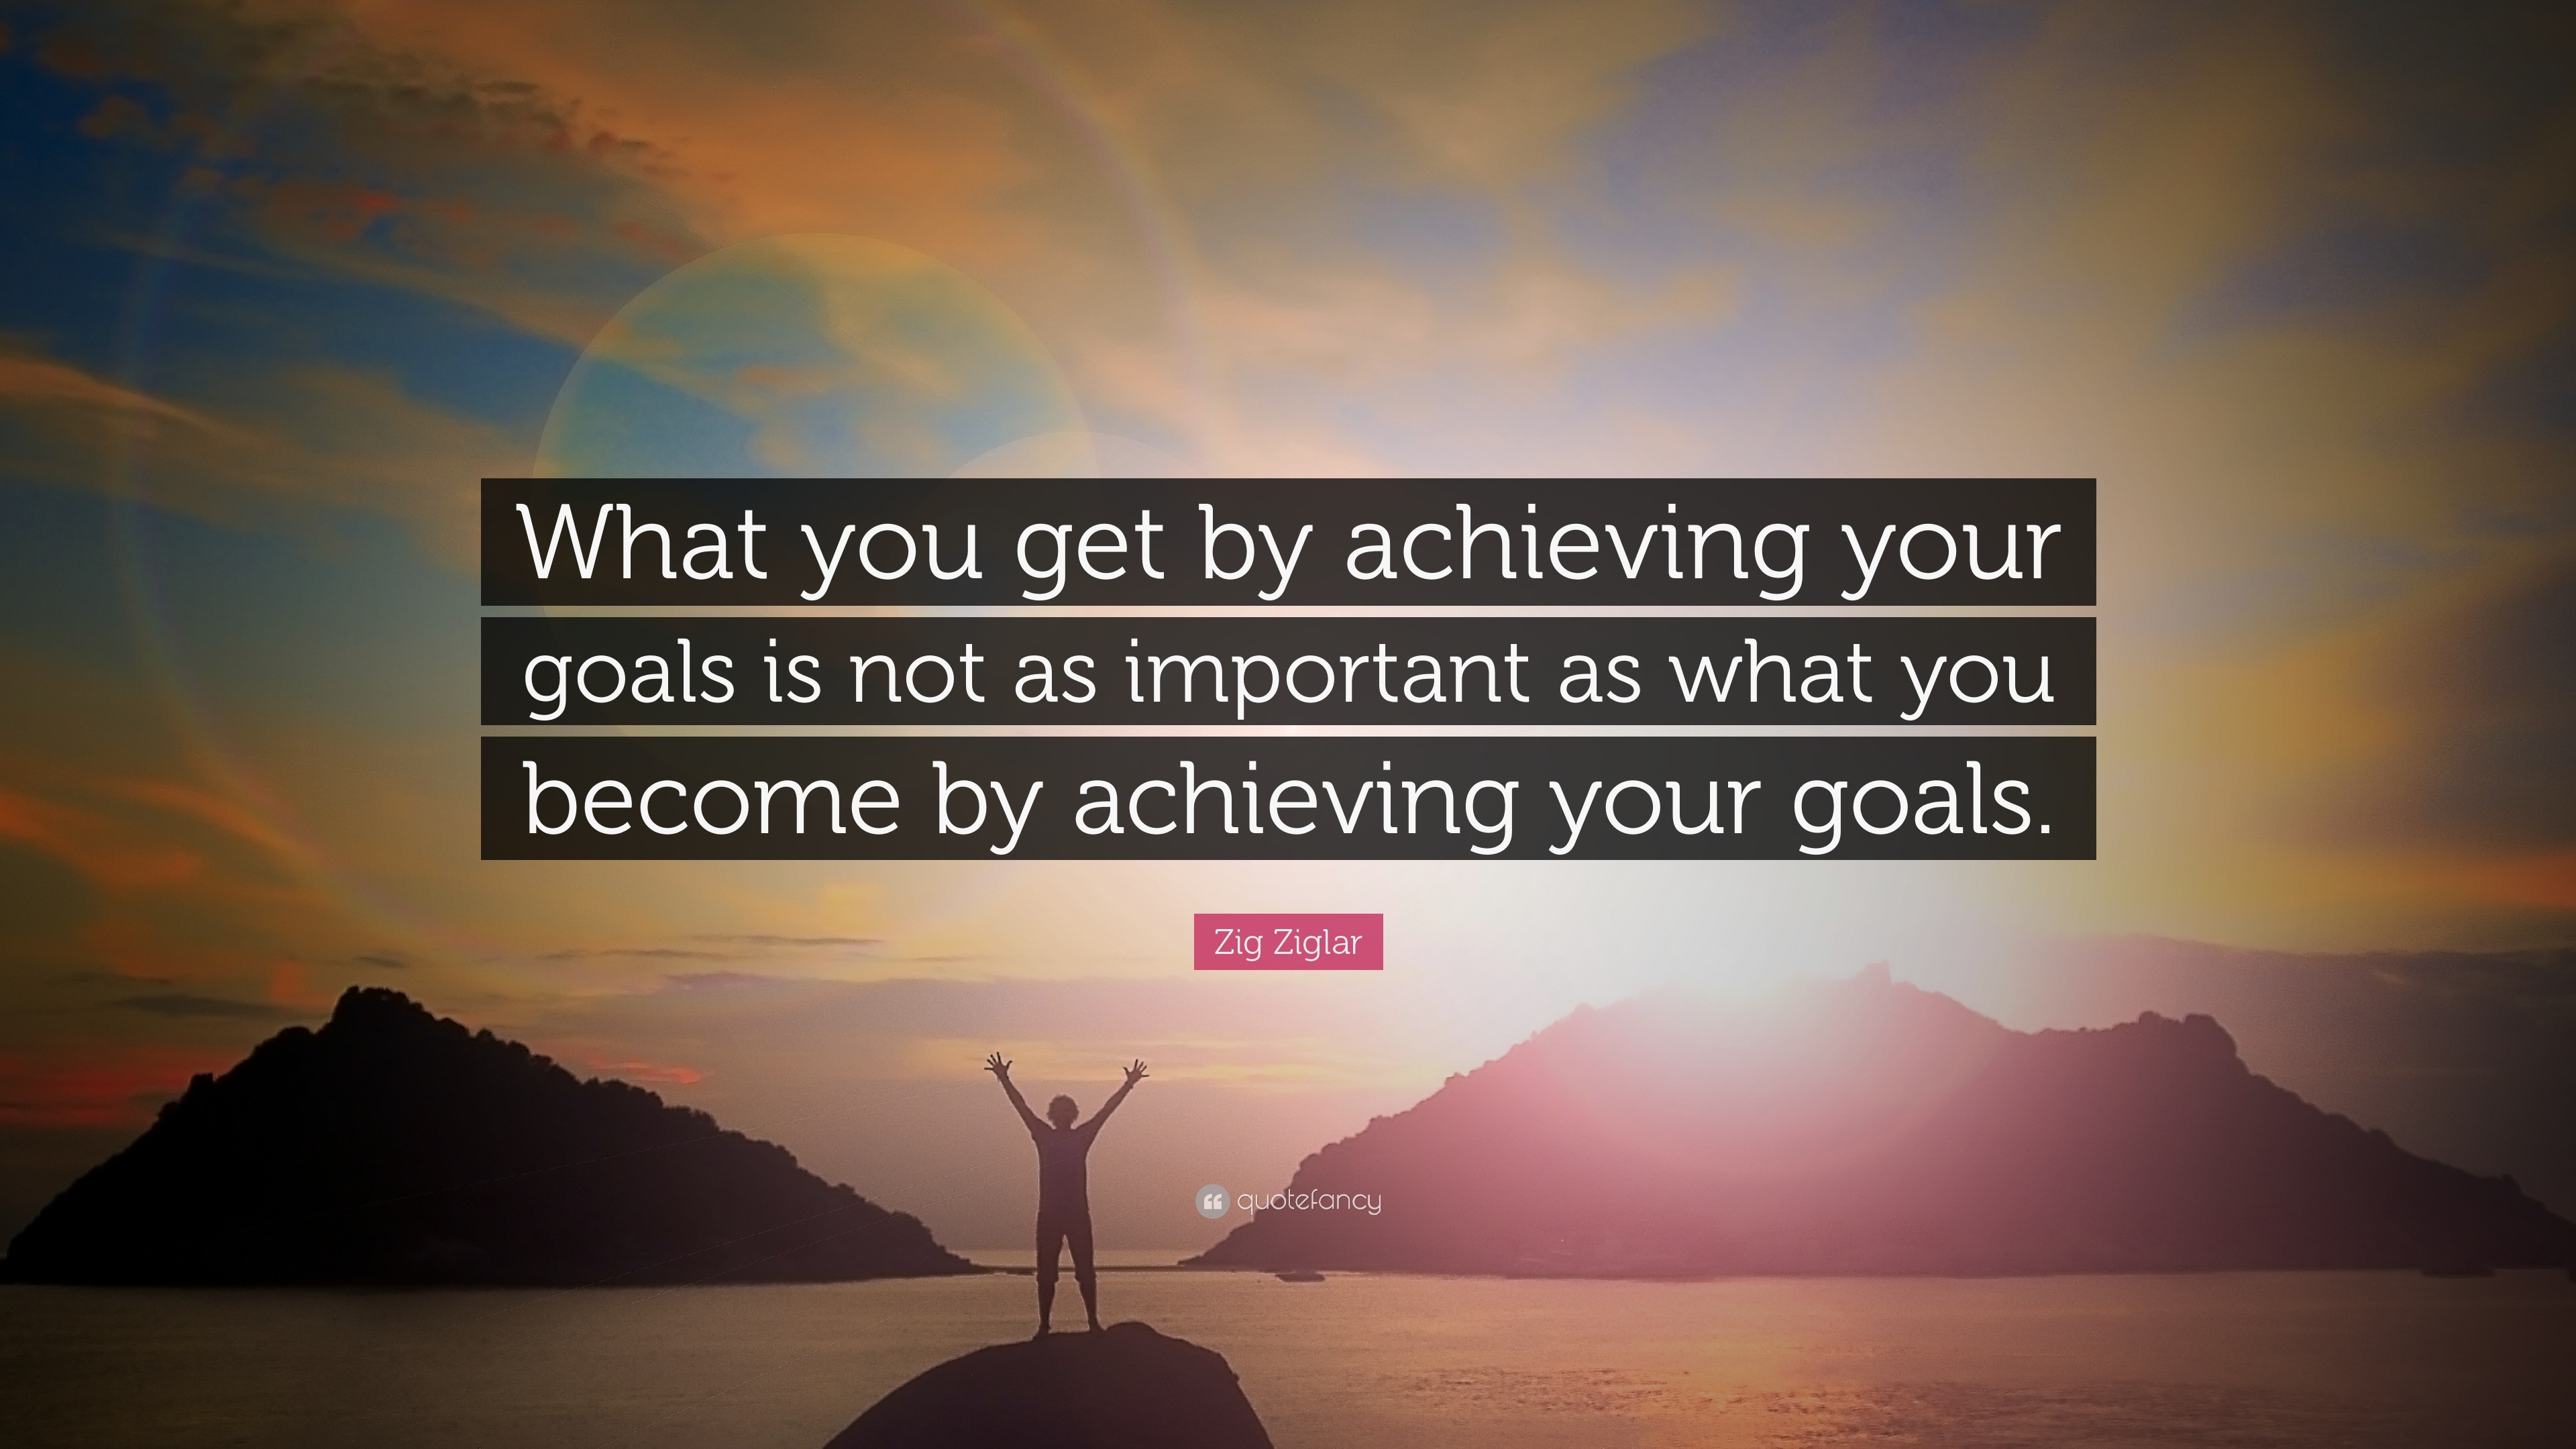 Zig Ziglar Quote “what You Get By Achieving Your Goals Is Not As